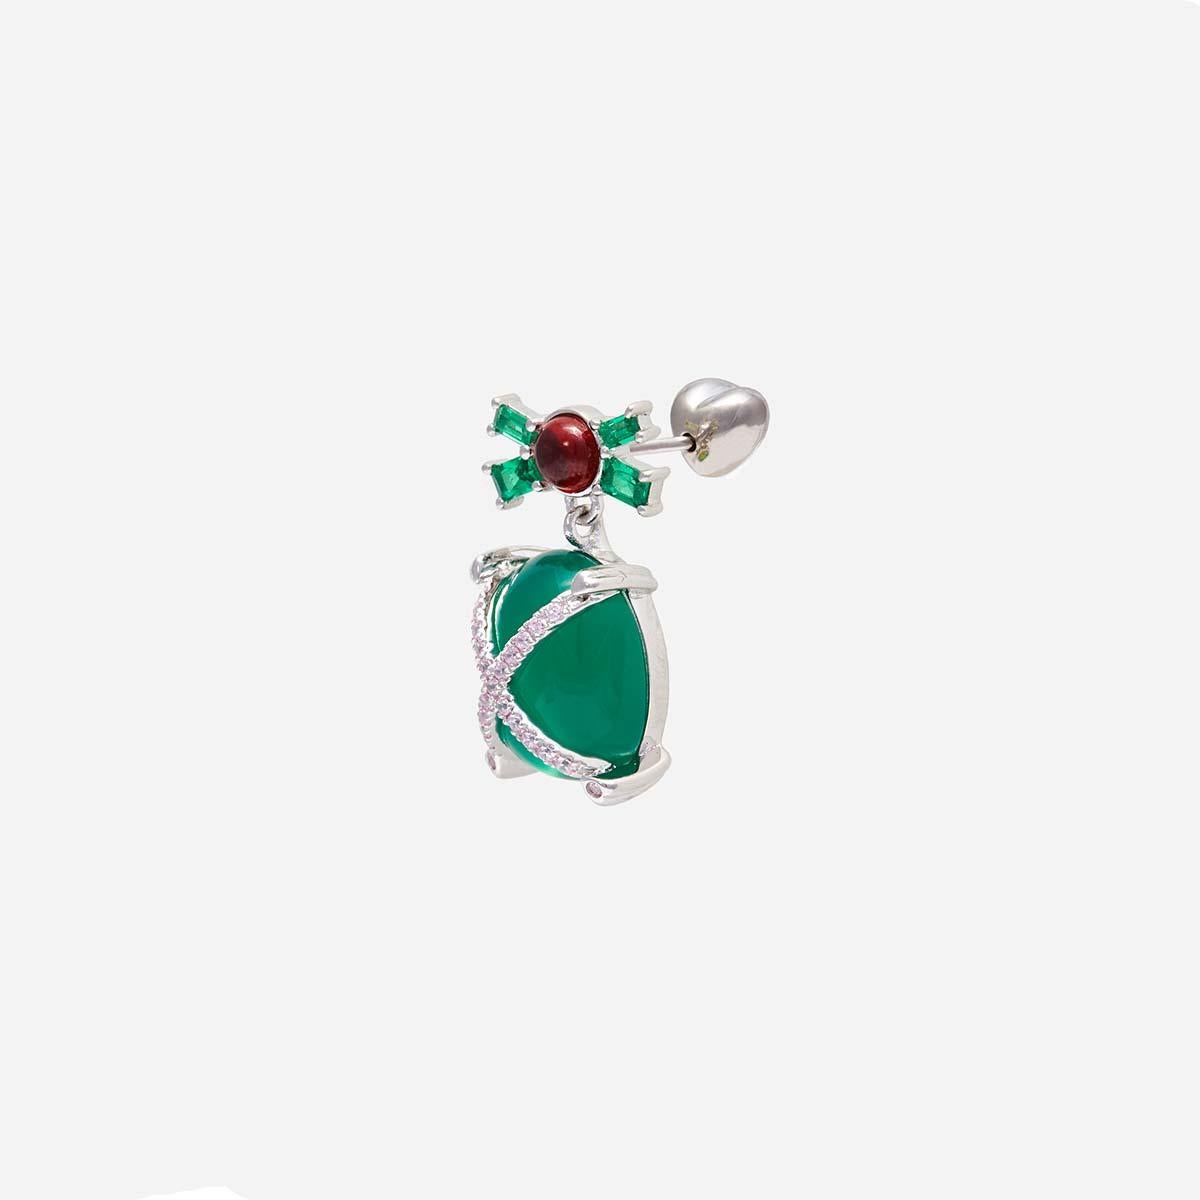 Earrings with green agate and red garnet in the heart bow. Each agate is different.
This is one of a kind piece.

COMPOSITION:STERLING SILVER/  CUBIC ZIRCONIA/ GREEN AGATE 7CT/ RED GARNET
COLOR: WHITE/GREEN
DIMENSIONS: 12MM X 22MM   
SOLD AS PAIRS
